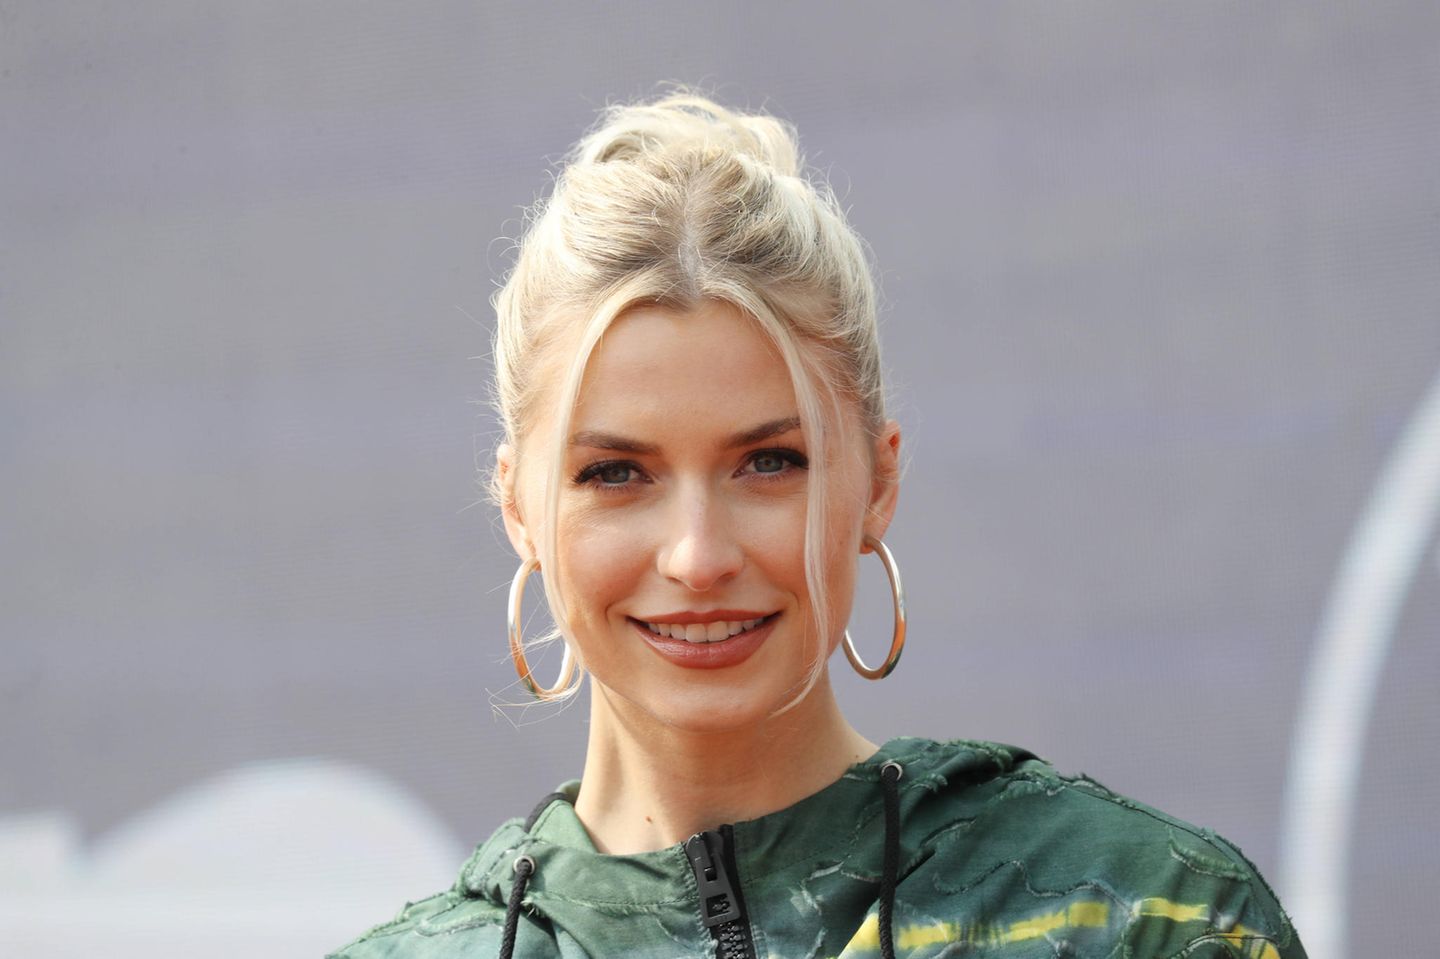 Lena gercke is turning 34 in lena was born in the 1980s. 